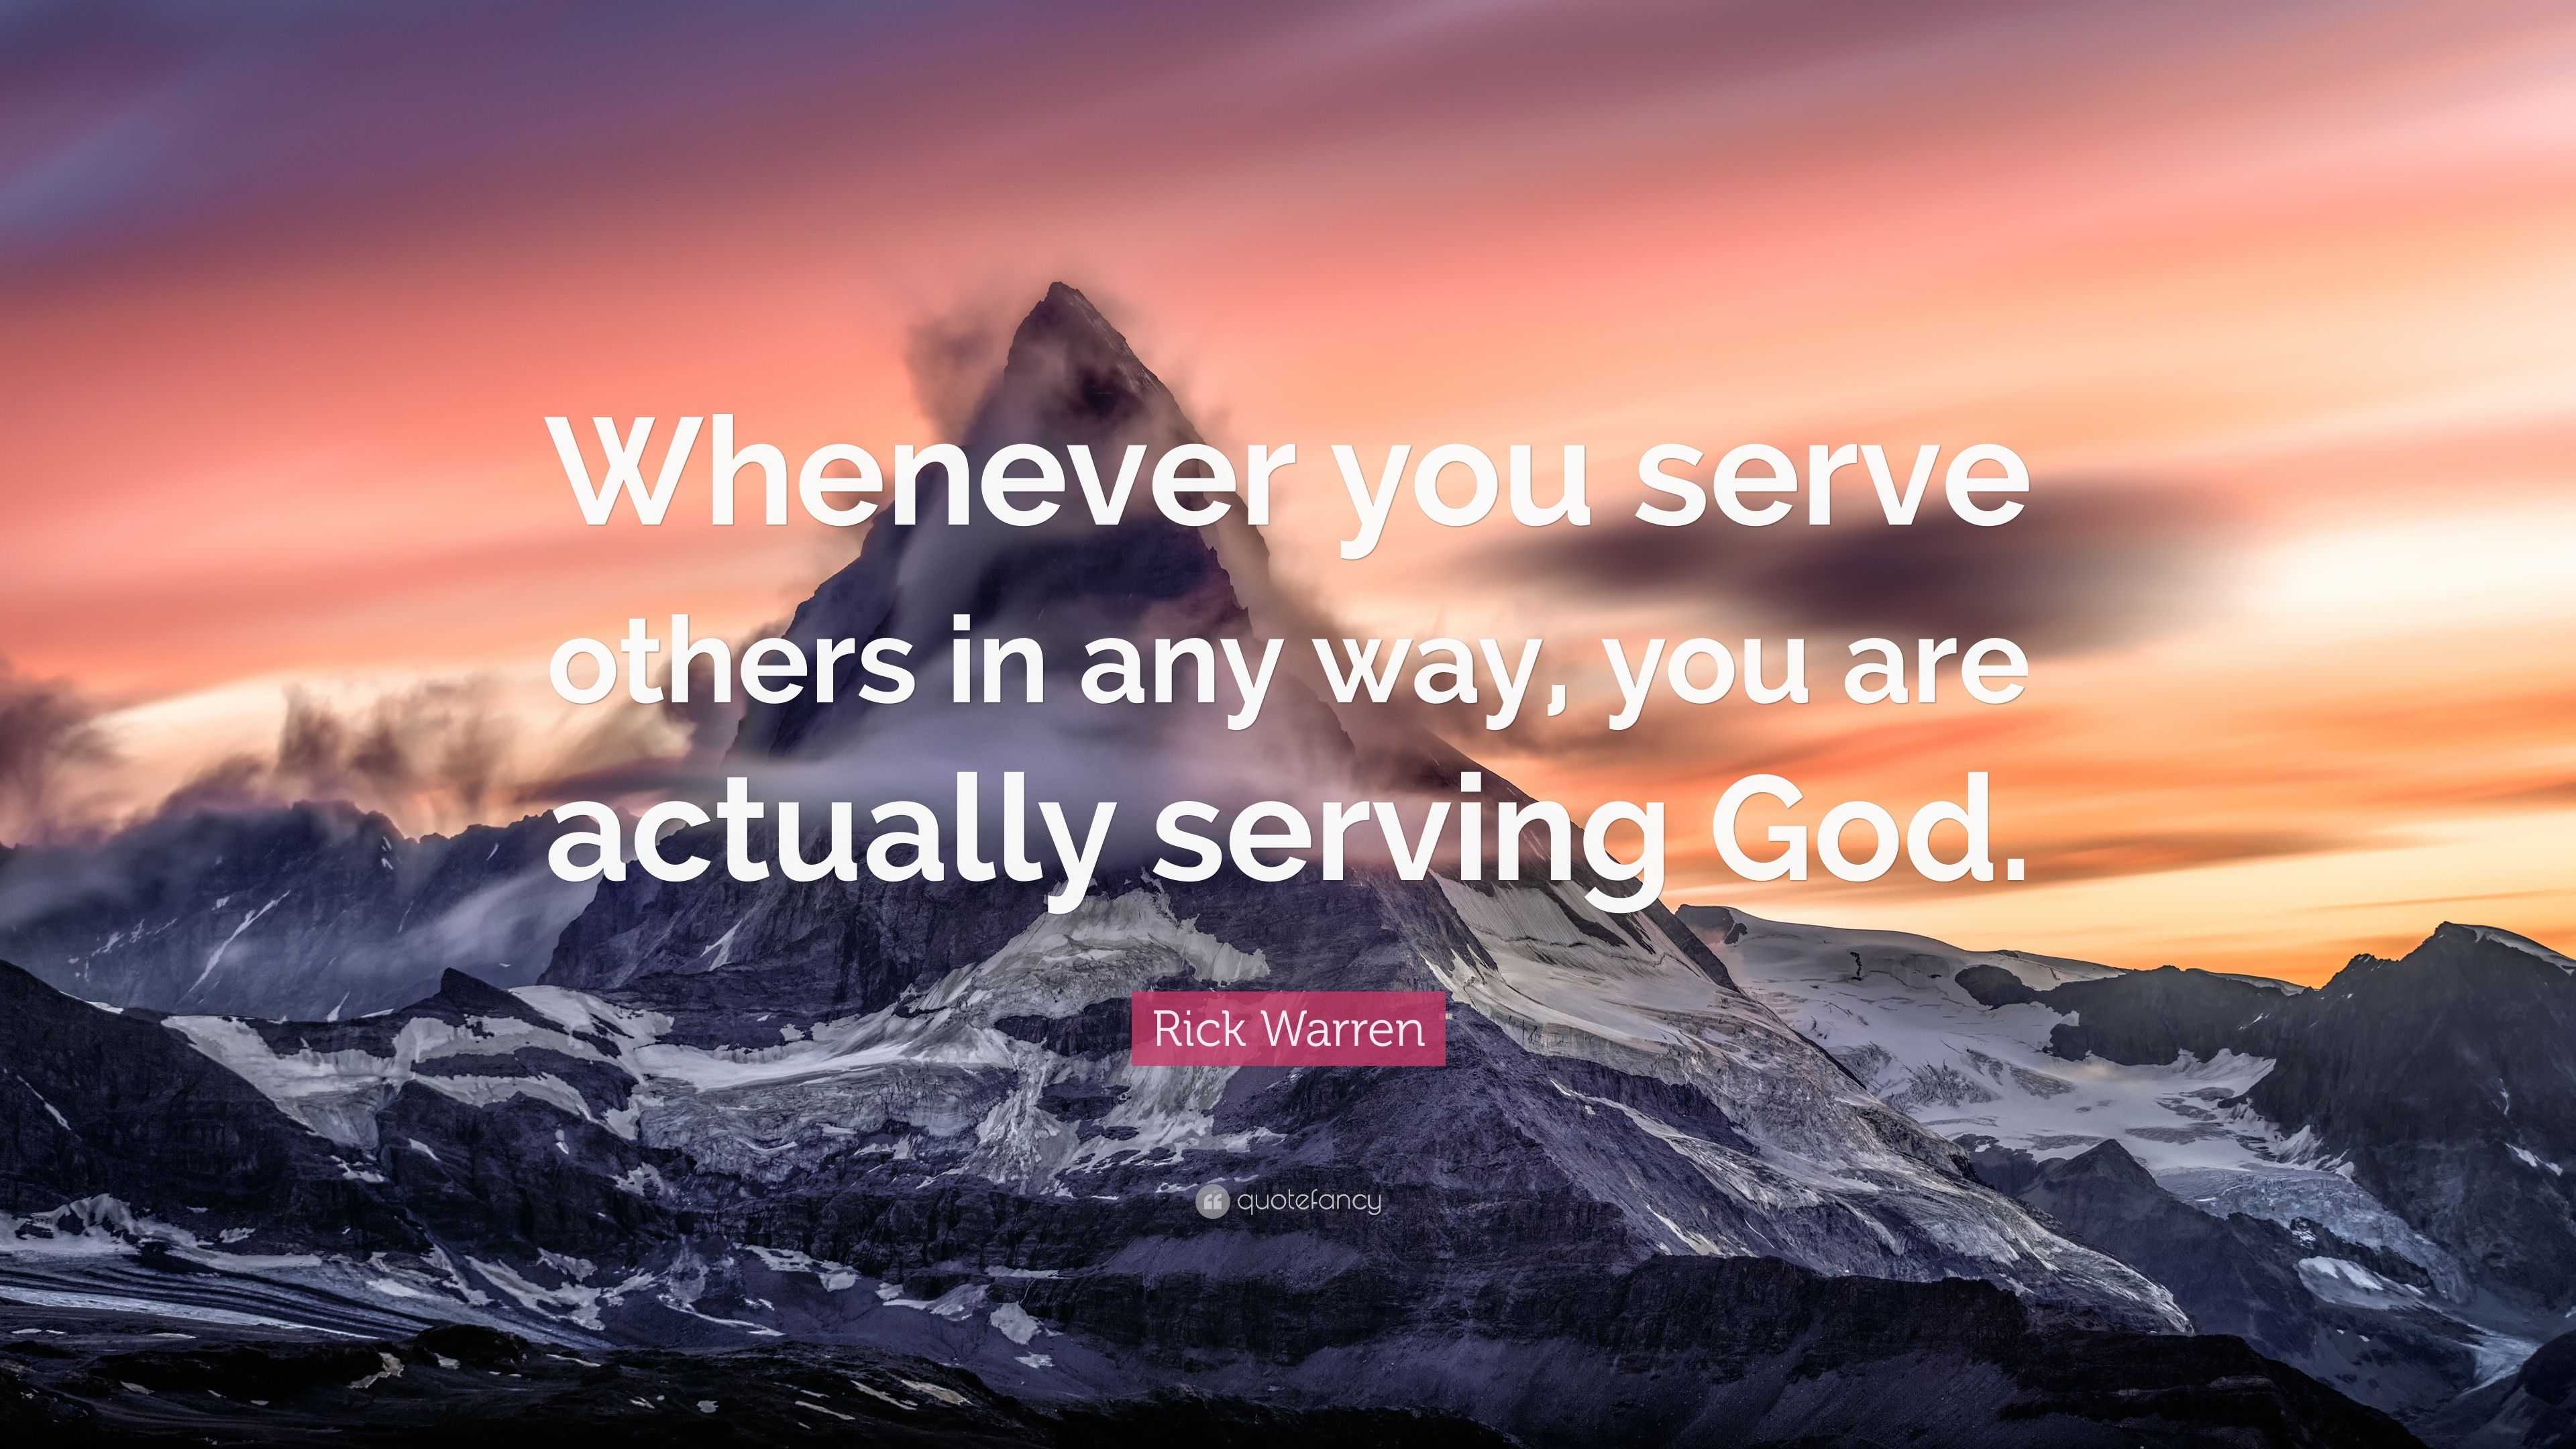 3646917 Rick Warren Quote Whenever you serve others in any way you are